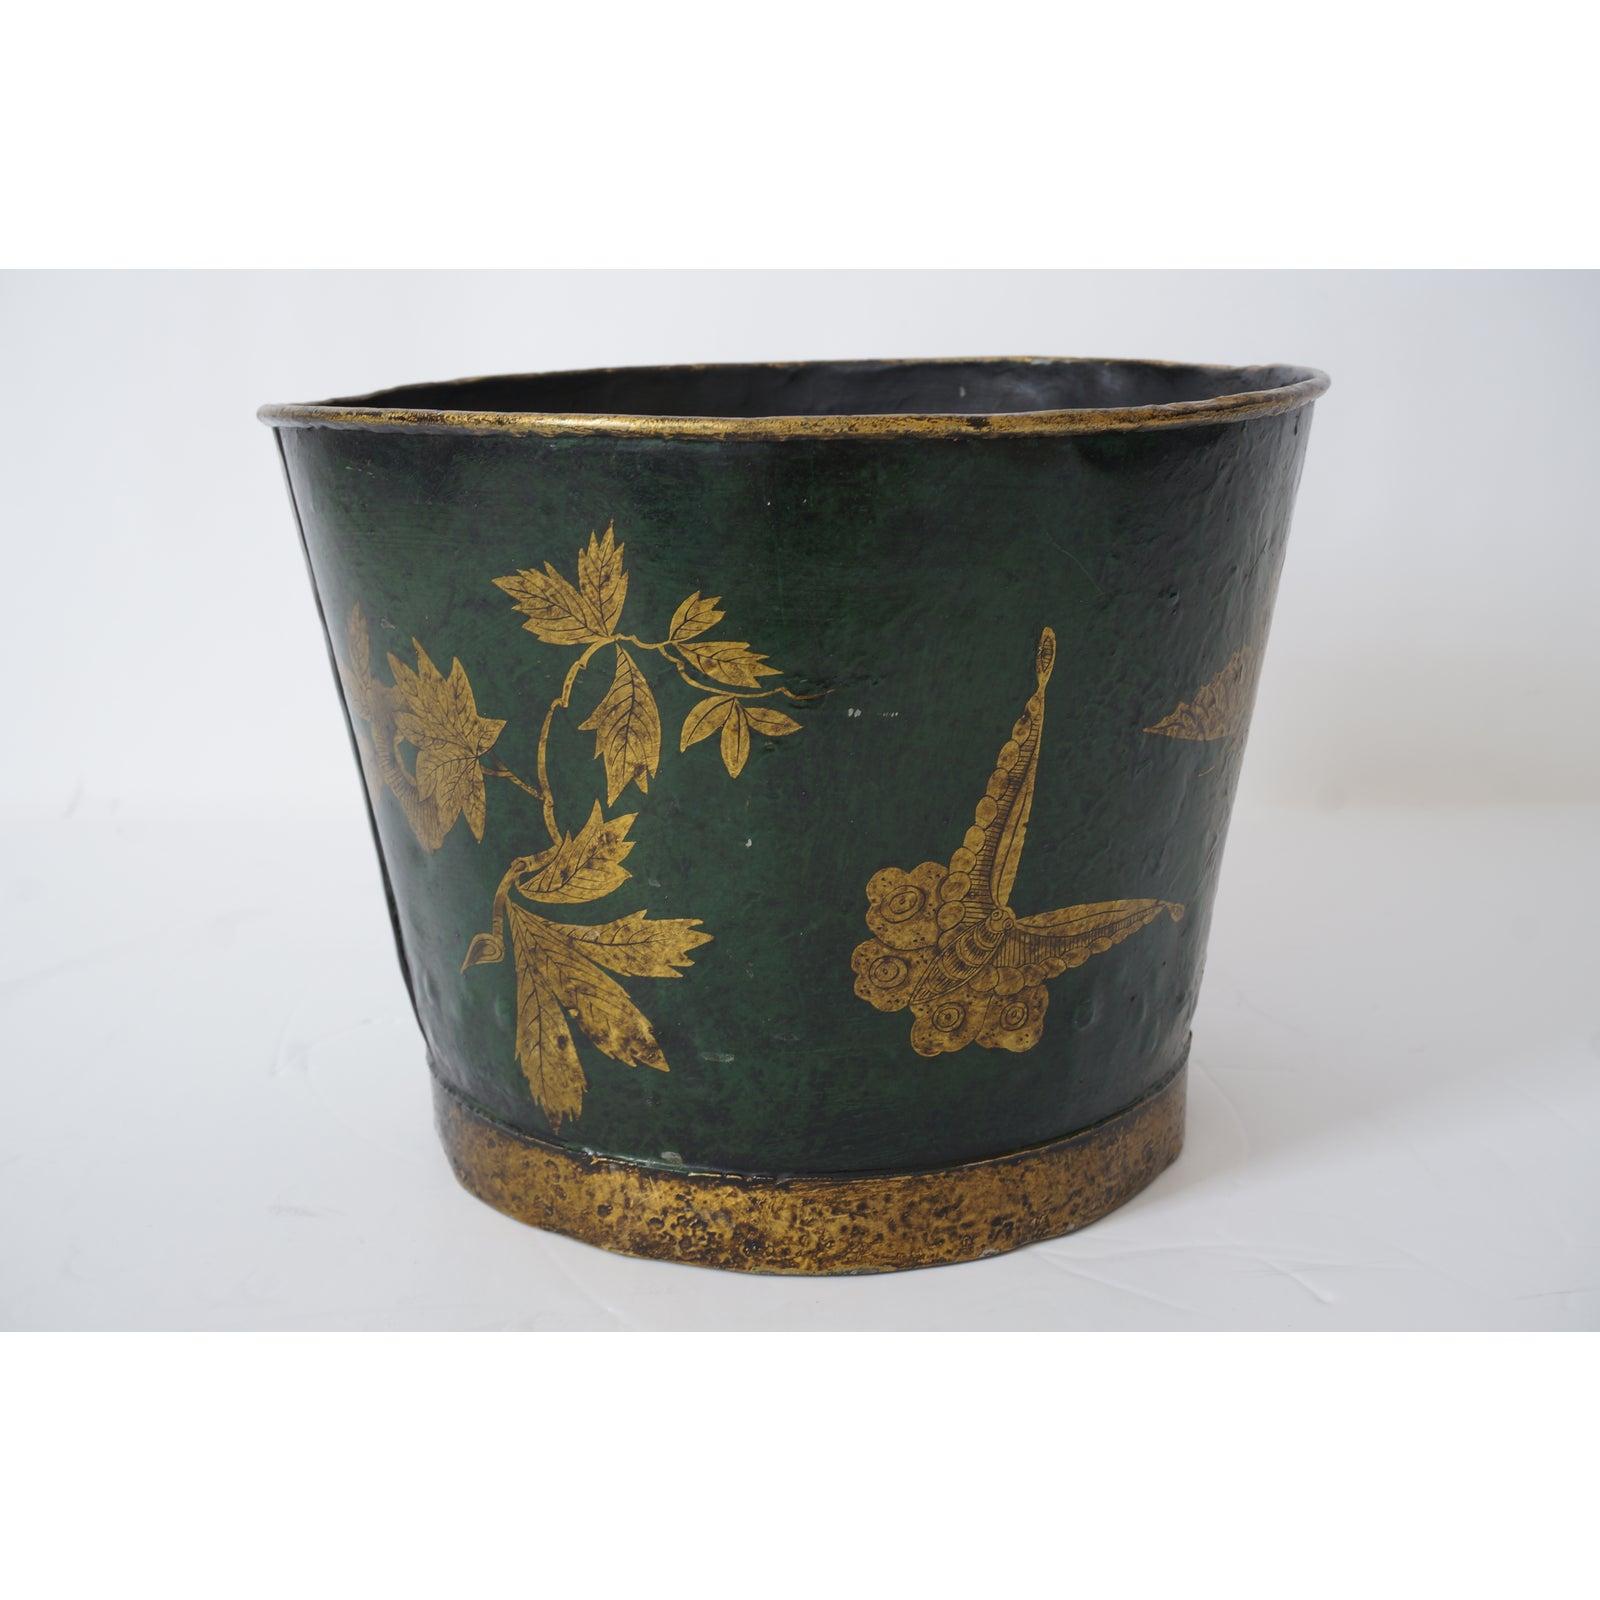 Edwardian English Toleware Bucket with Butterfles